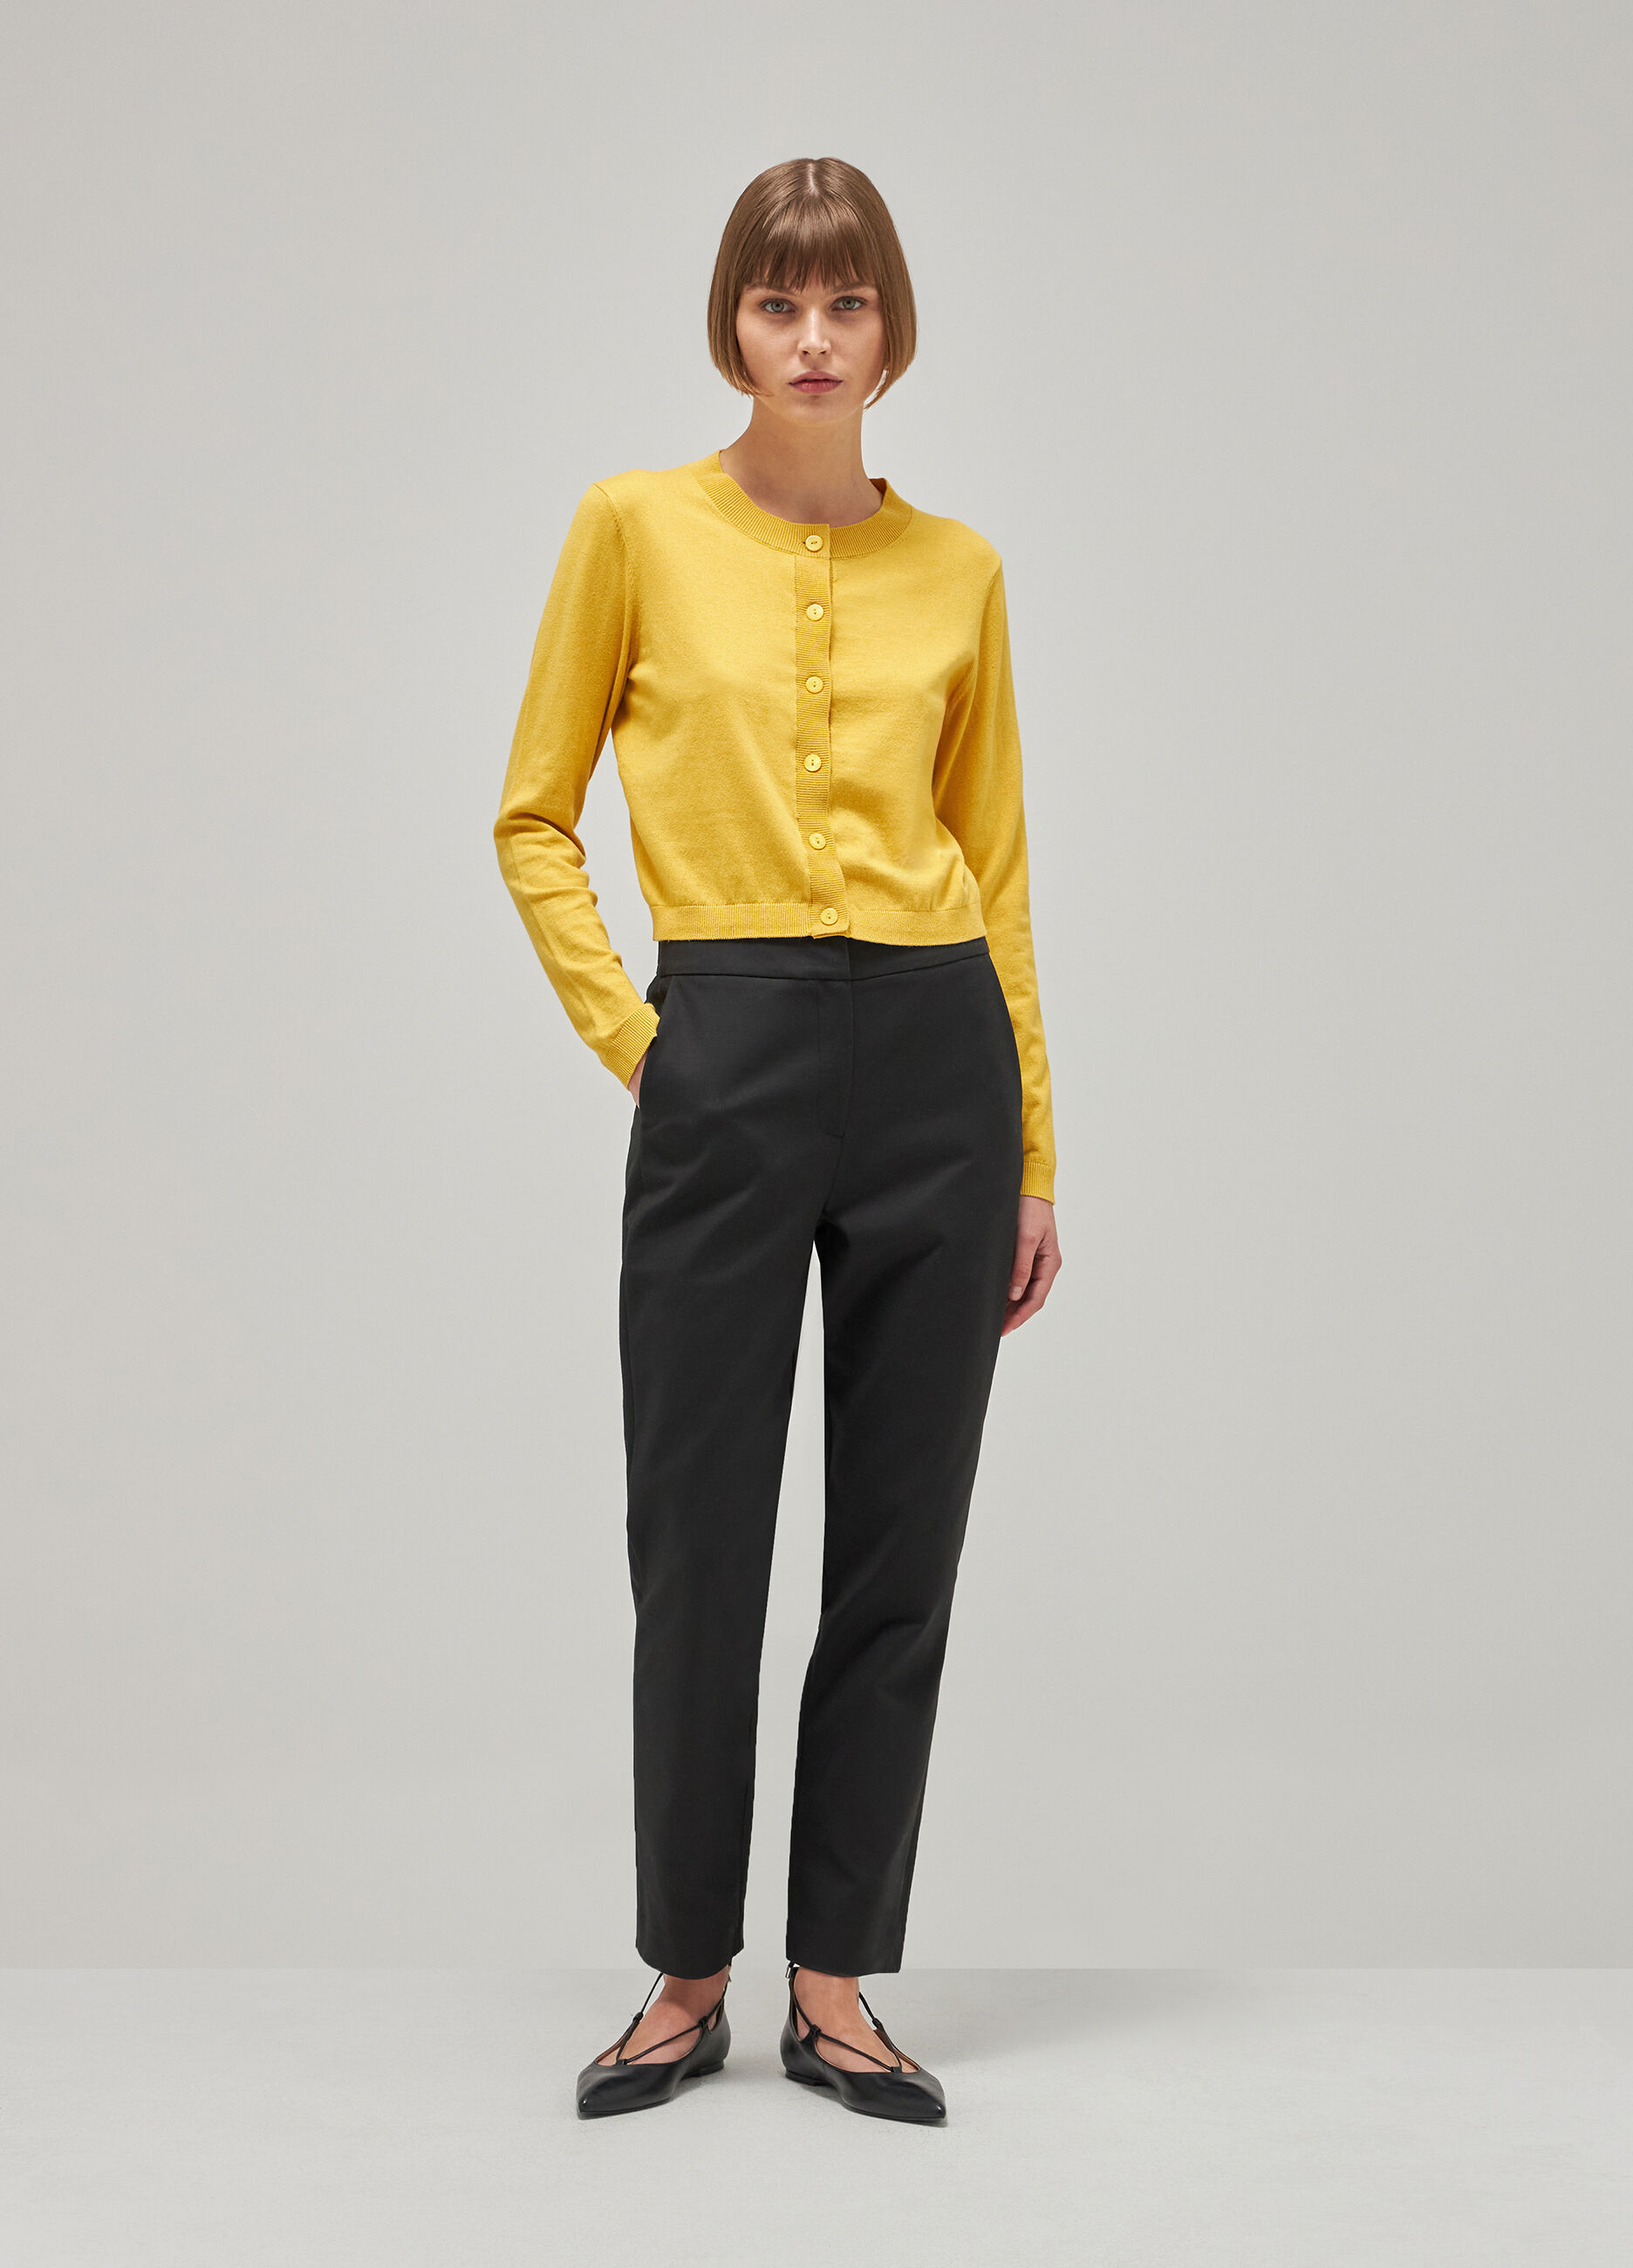 Black cigarette trousers with elastic